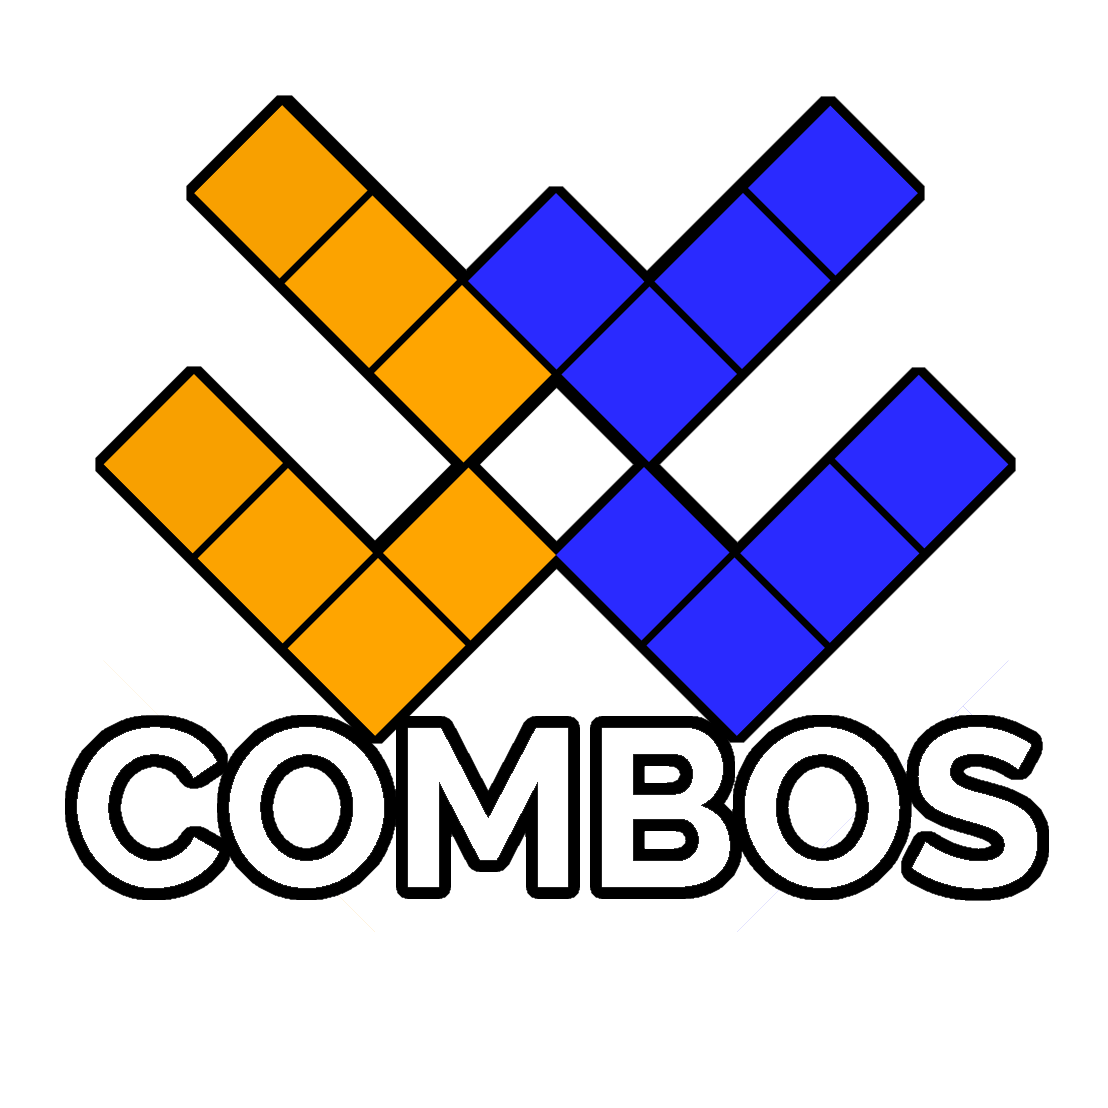 Combos Logo - Worldwide Combos, free and competitive block-stacking game